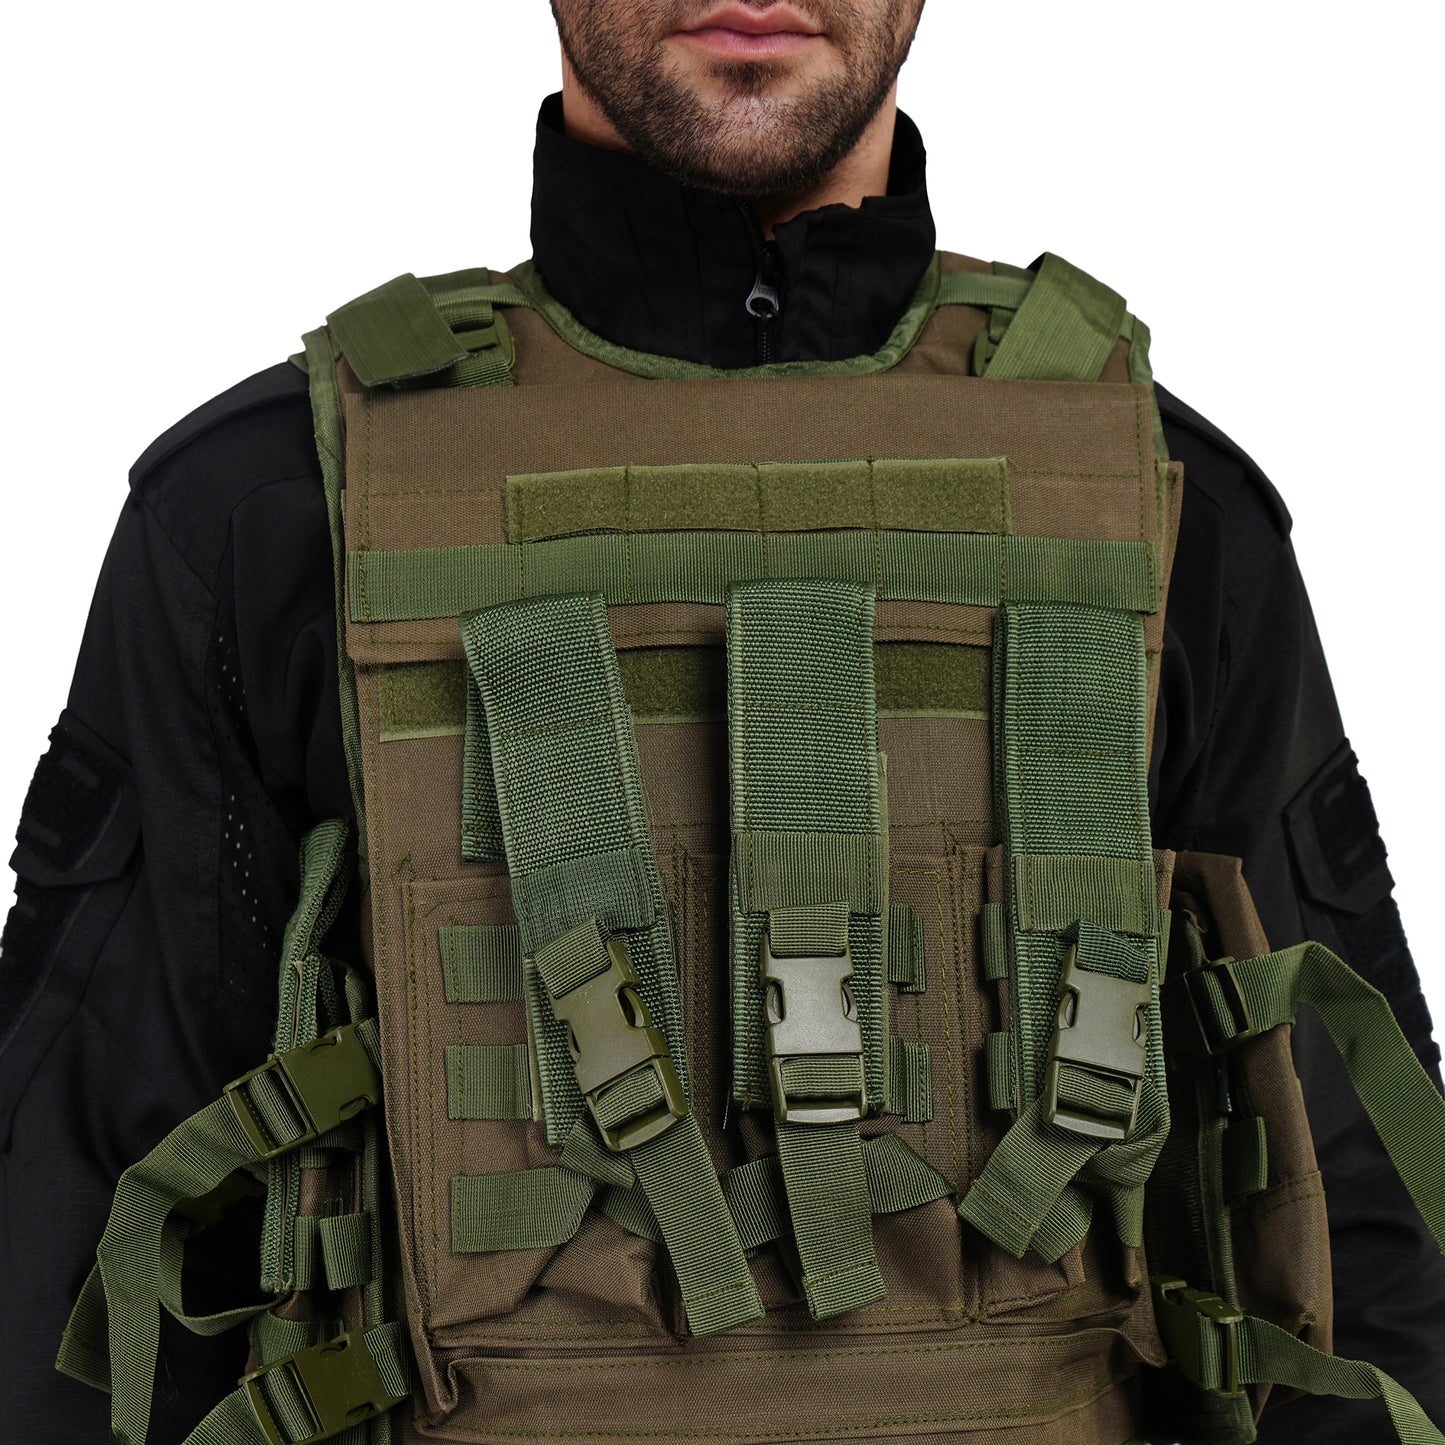 Tactical Vest Pouch with Bulletproof Jacket Cover Dark Olive Green - Premium Quality